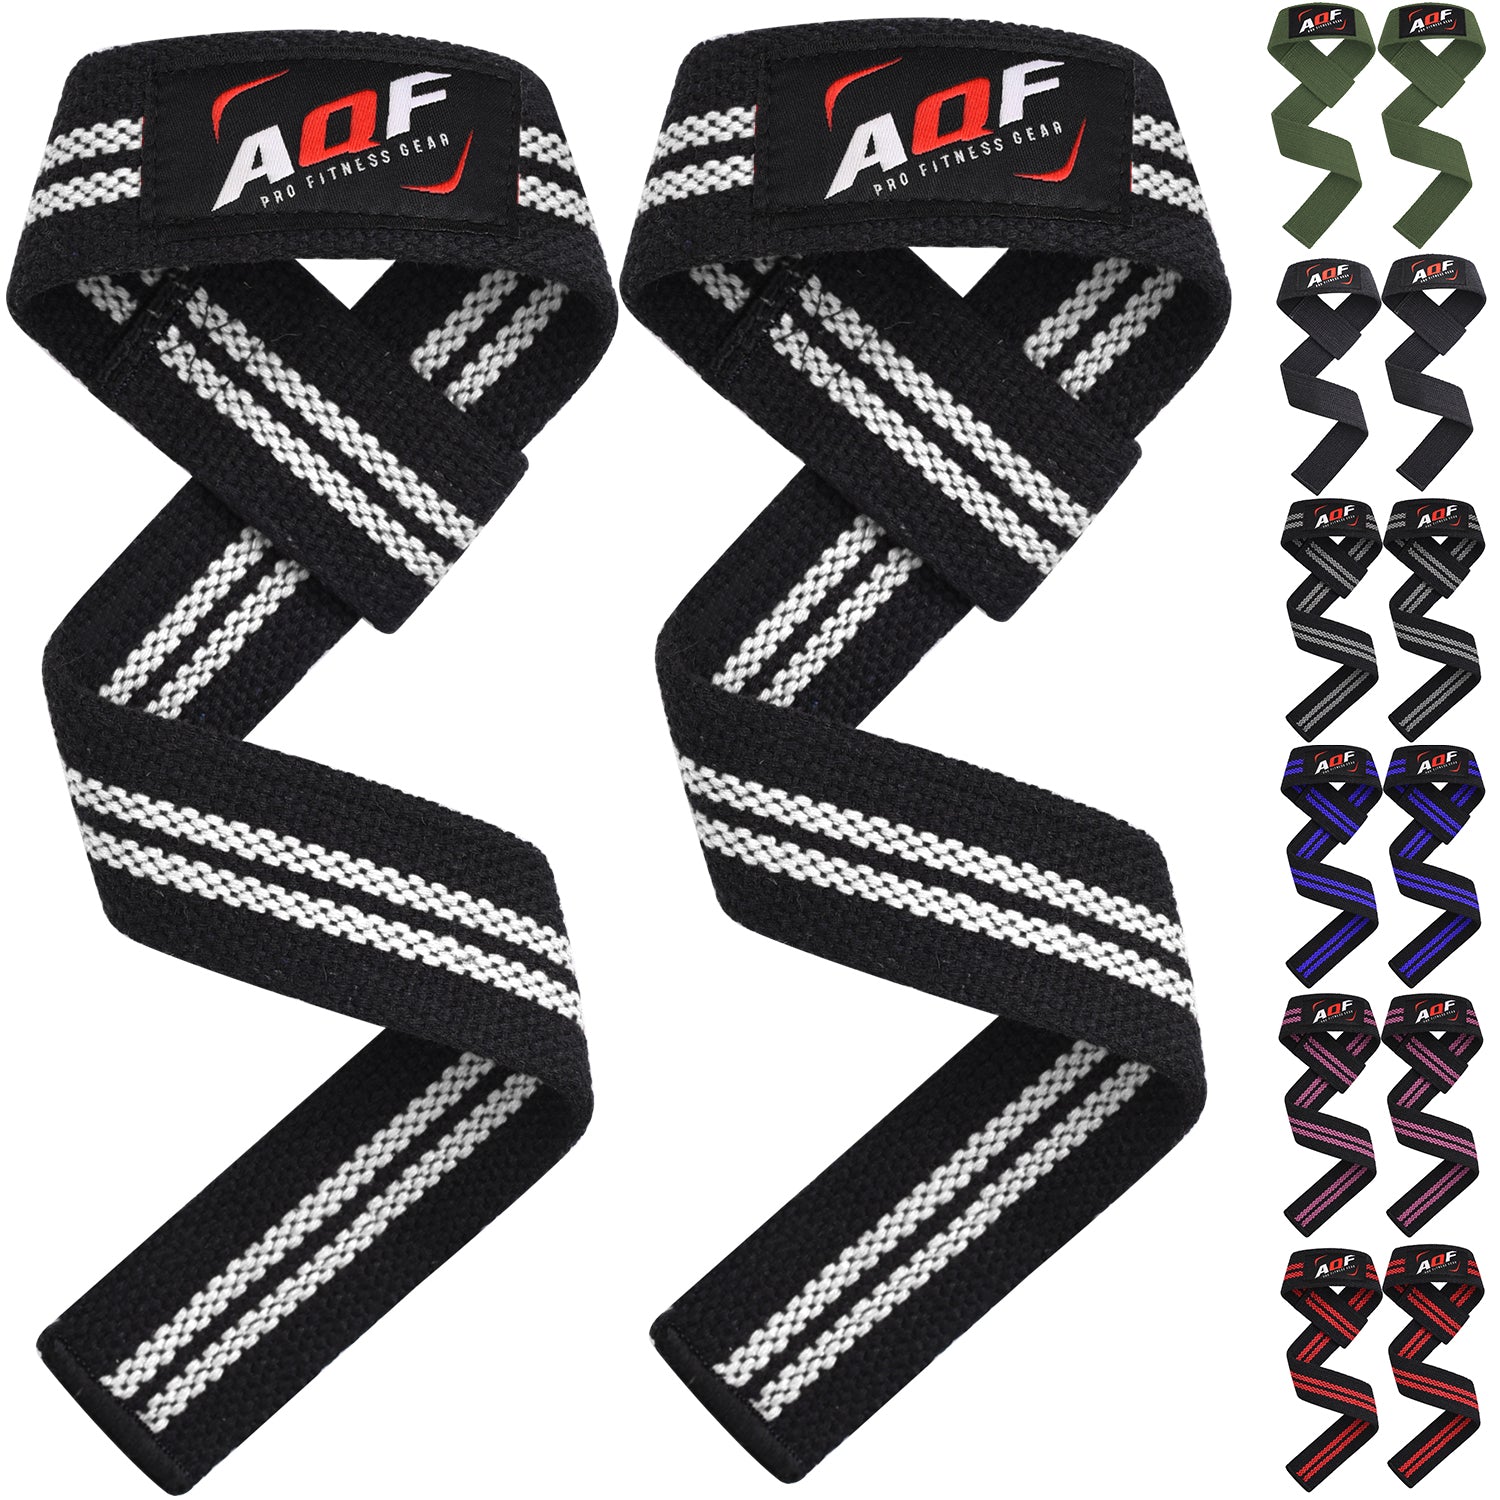 Color variations of AQF Weightlifting Gym Wrist Strap